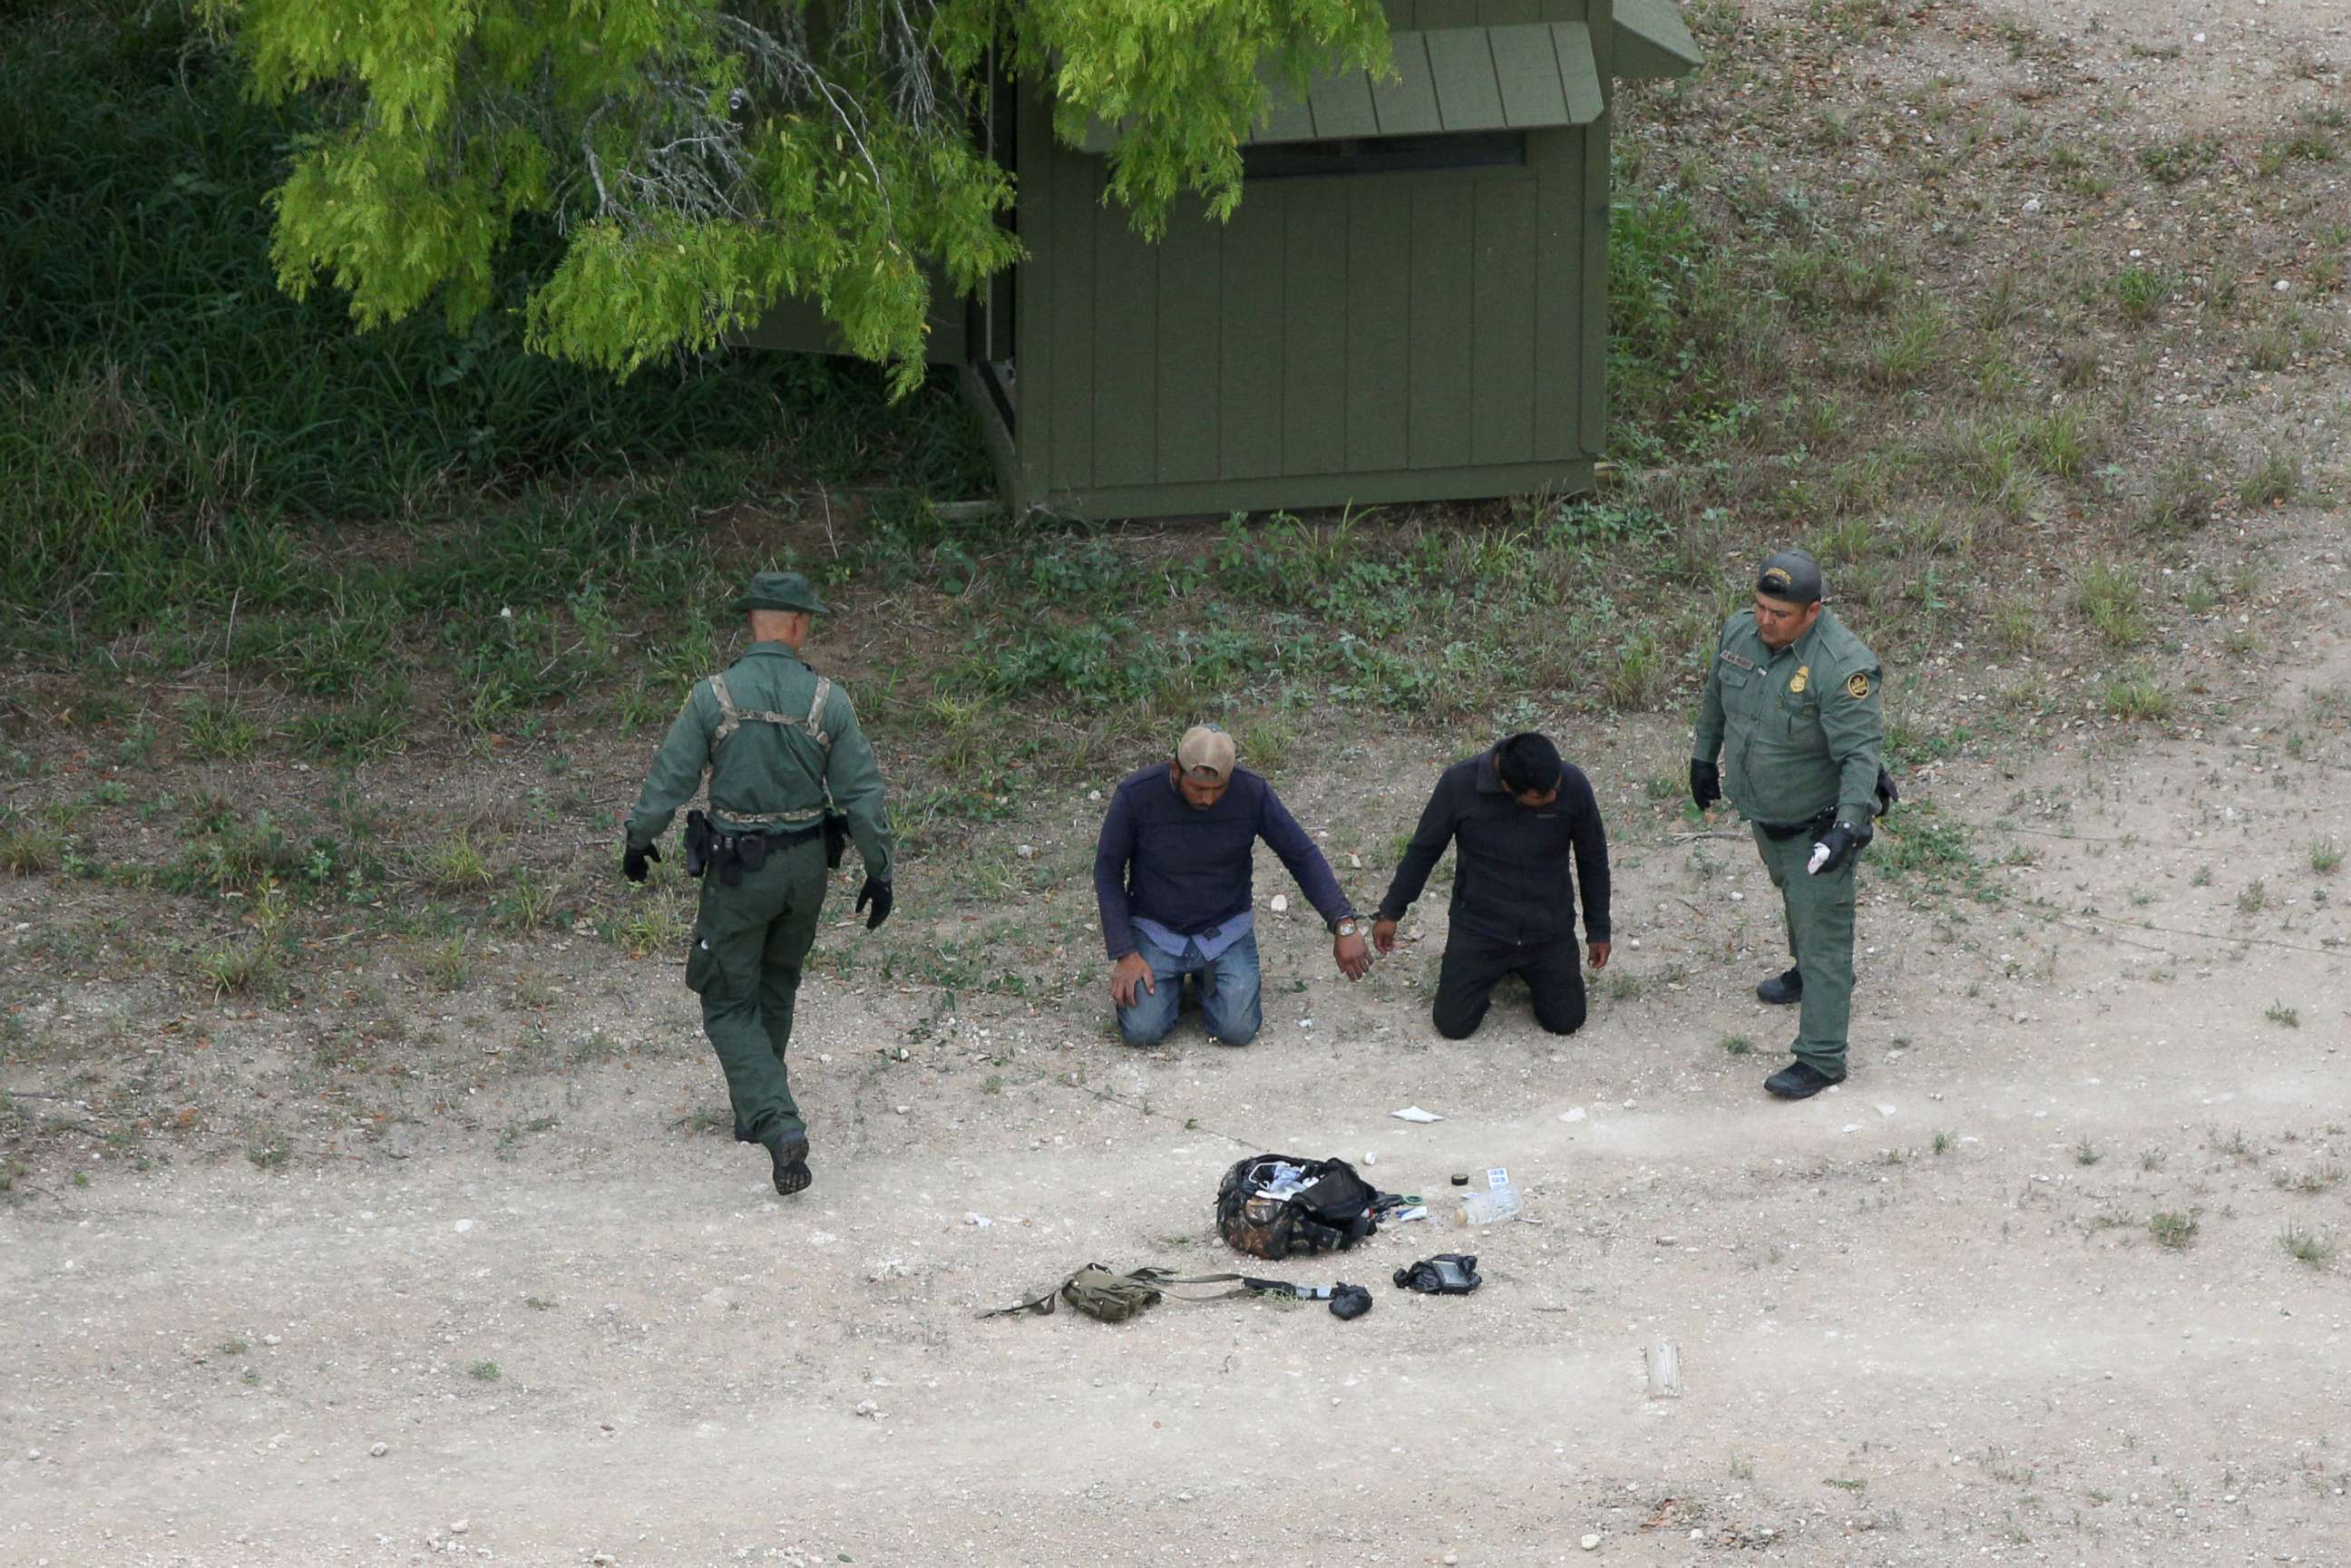 PHOTO: Border patrol agents apprehend people who illegally crossed the border from Mexico into the U.S. in the Rio Grande Valley sector, near Falfurrias, Texas, April 4, 2018.